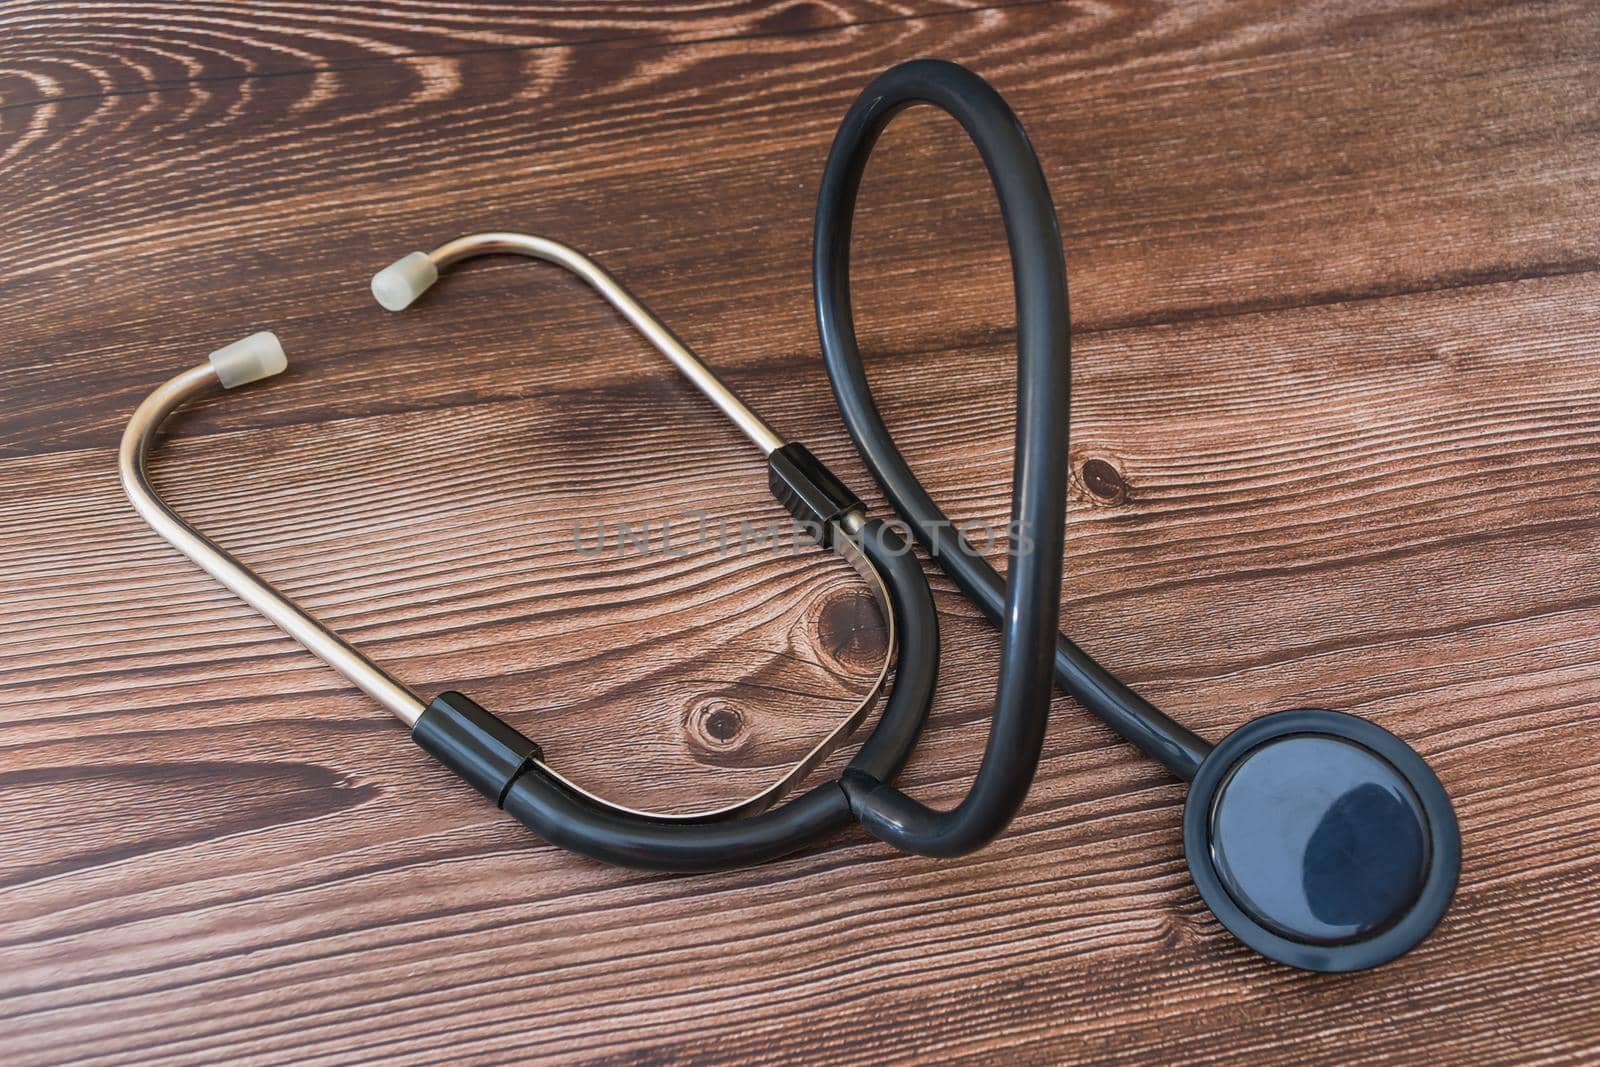 Medical stethoscope for measuring heartbeat close up